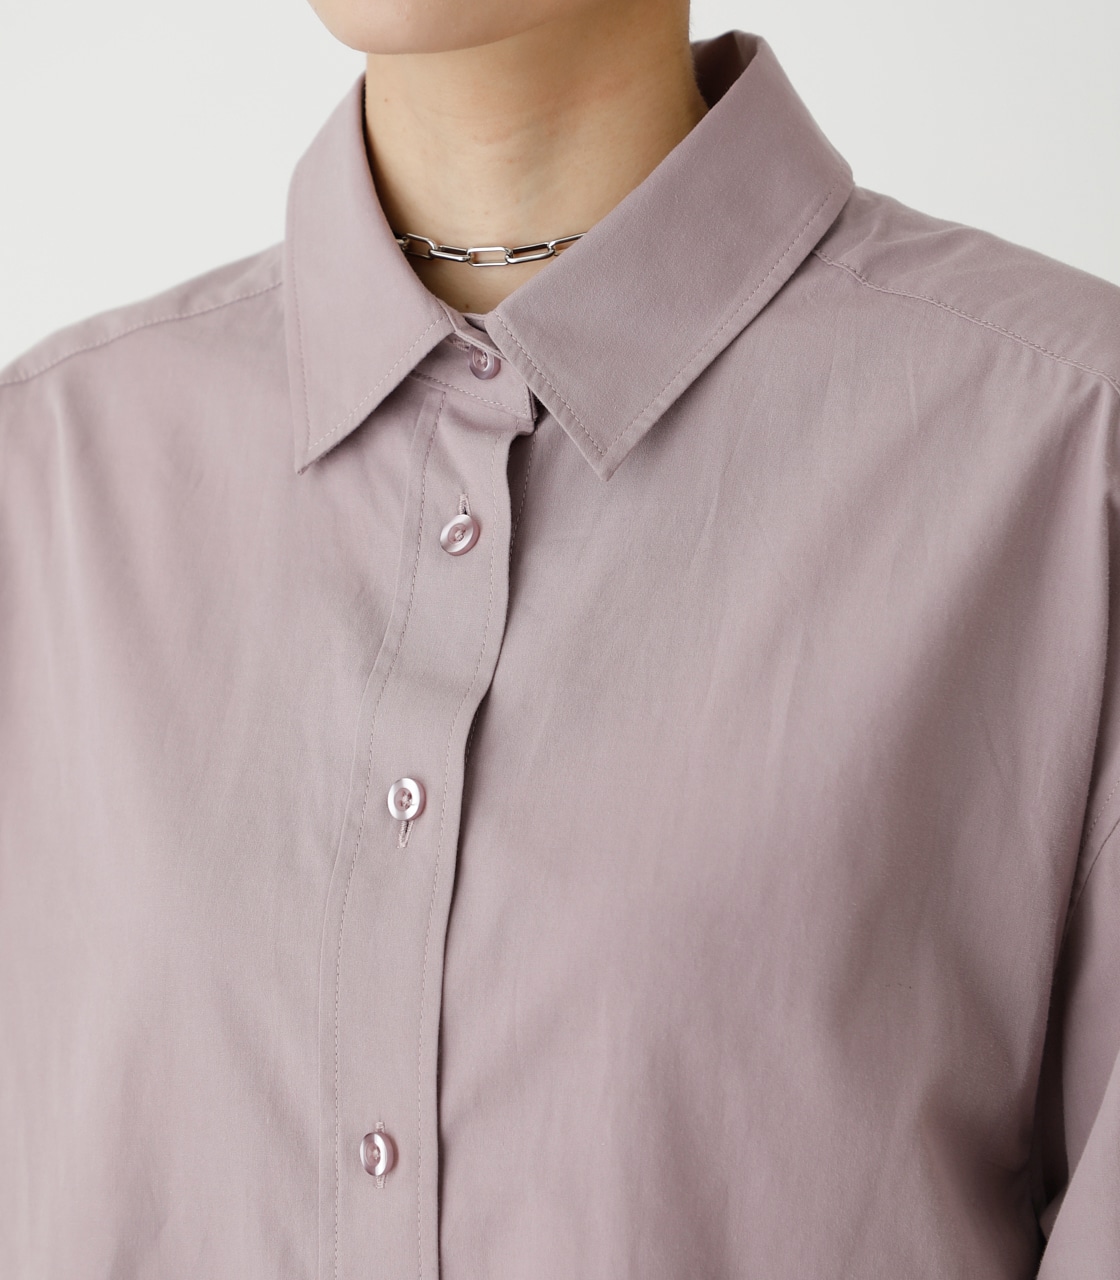 COLOR SIMPLE SHIRTS/カラーシンプルシャツ 詳細画像 L/PUR 8